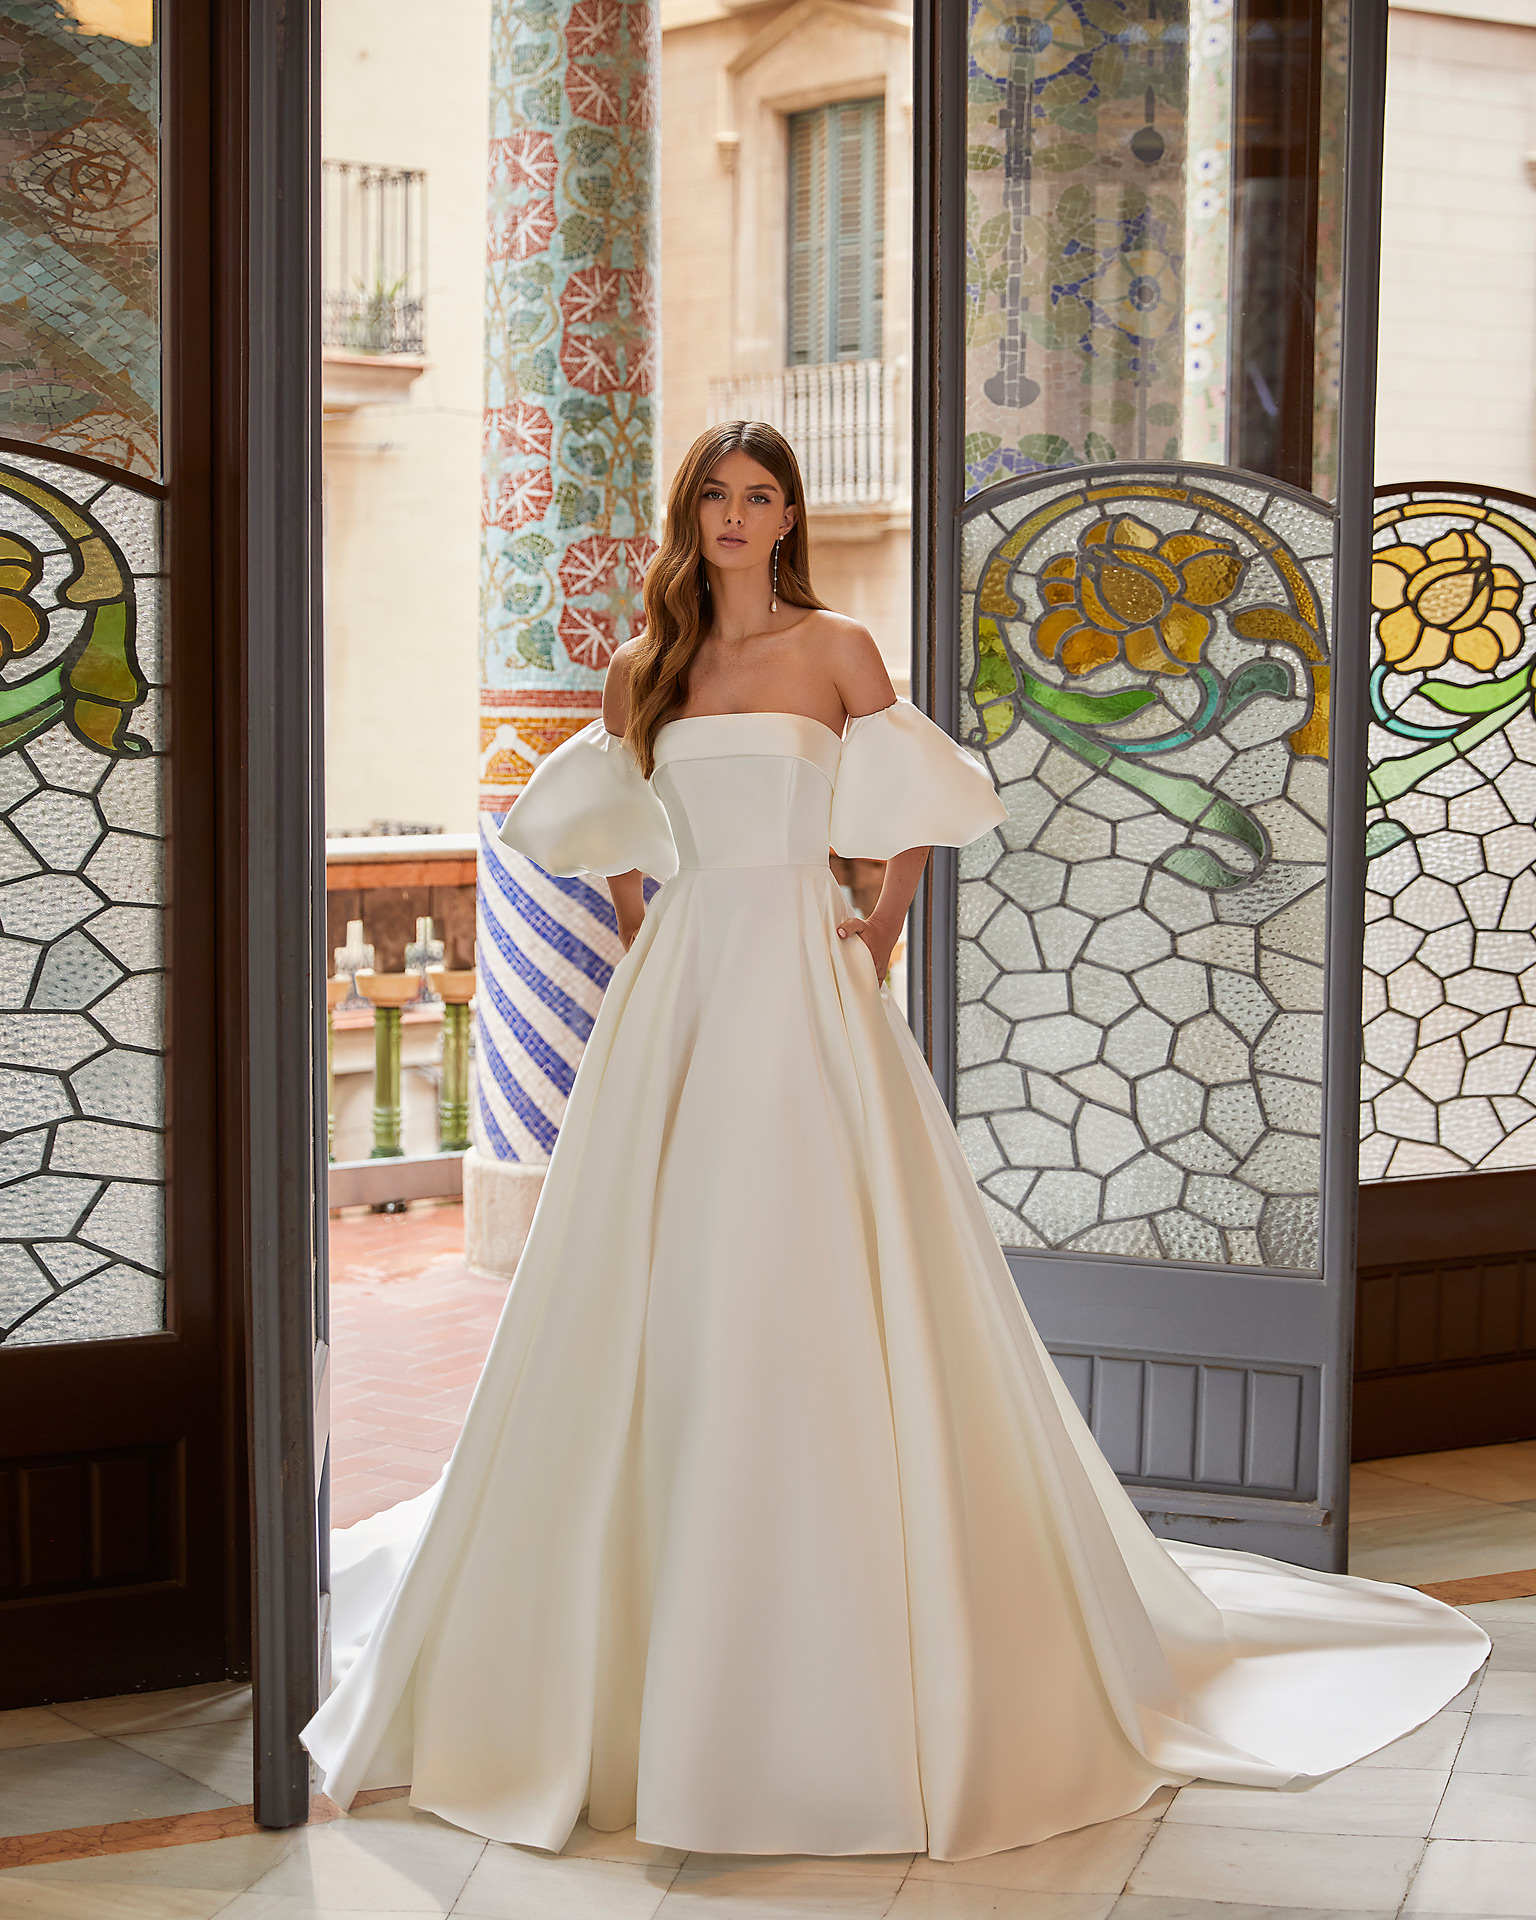 Classic-style wedding dress, made of matt Mikado, with voluminous sleeves; with a strapless neckline, a button-up back, and puffed sleeves. Unique Luna Novias outfit made entirely of matt Mikado. LUNA_NOVIAS.